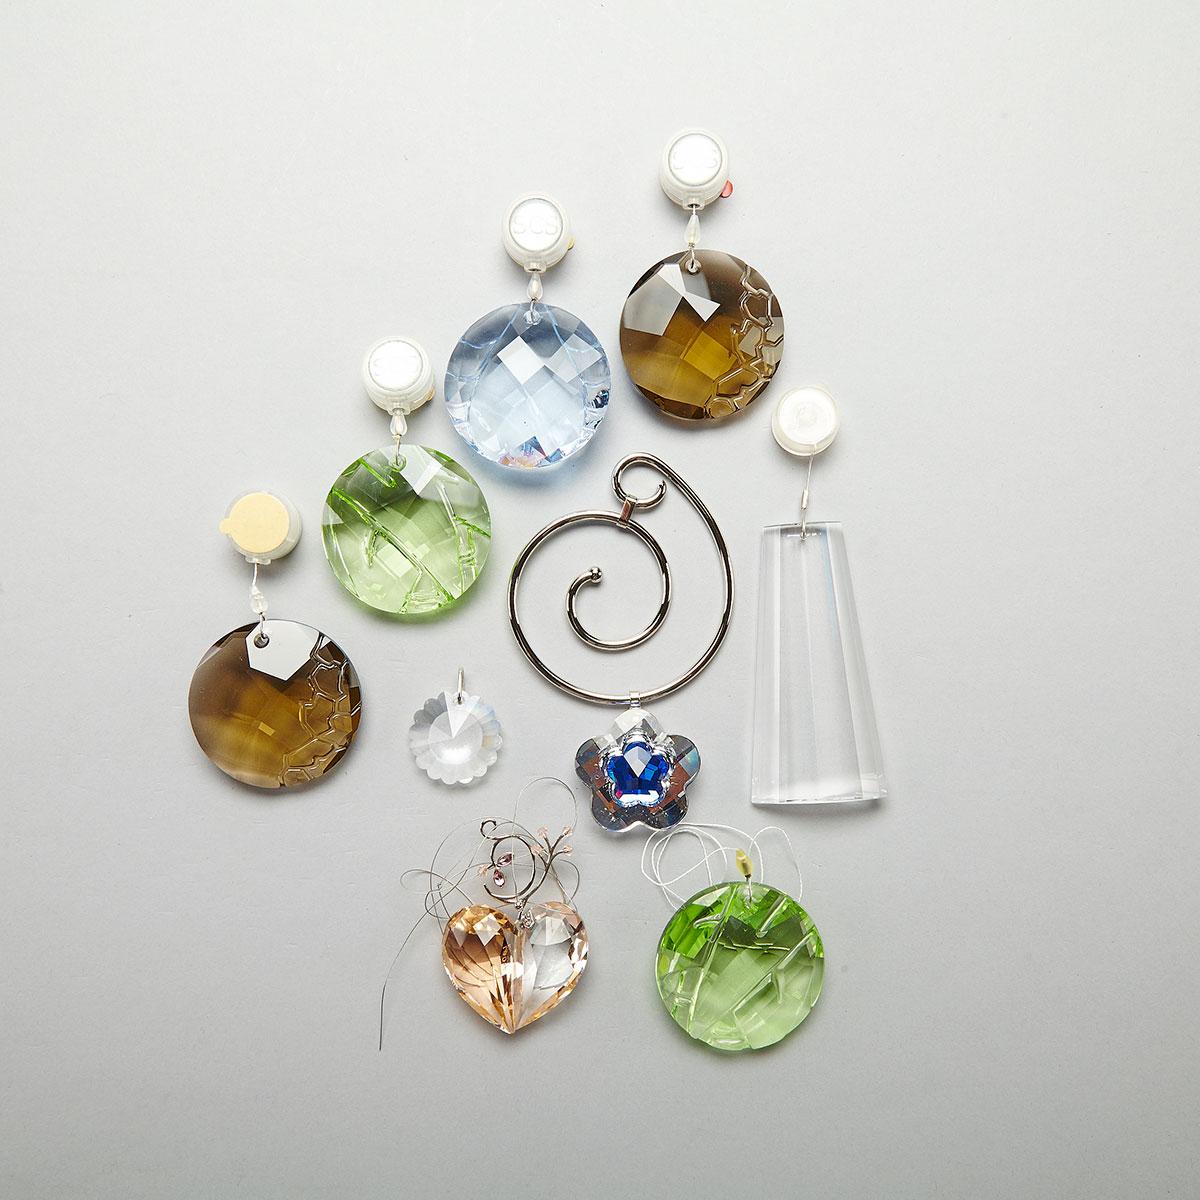 Eight Swarovski Crystal Pieces, late 20th/early 21st century